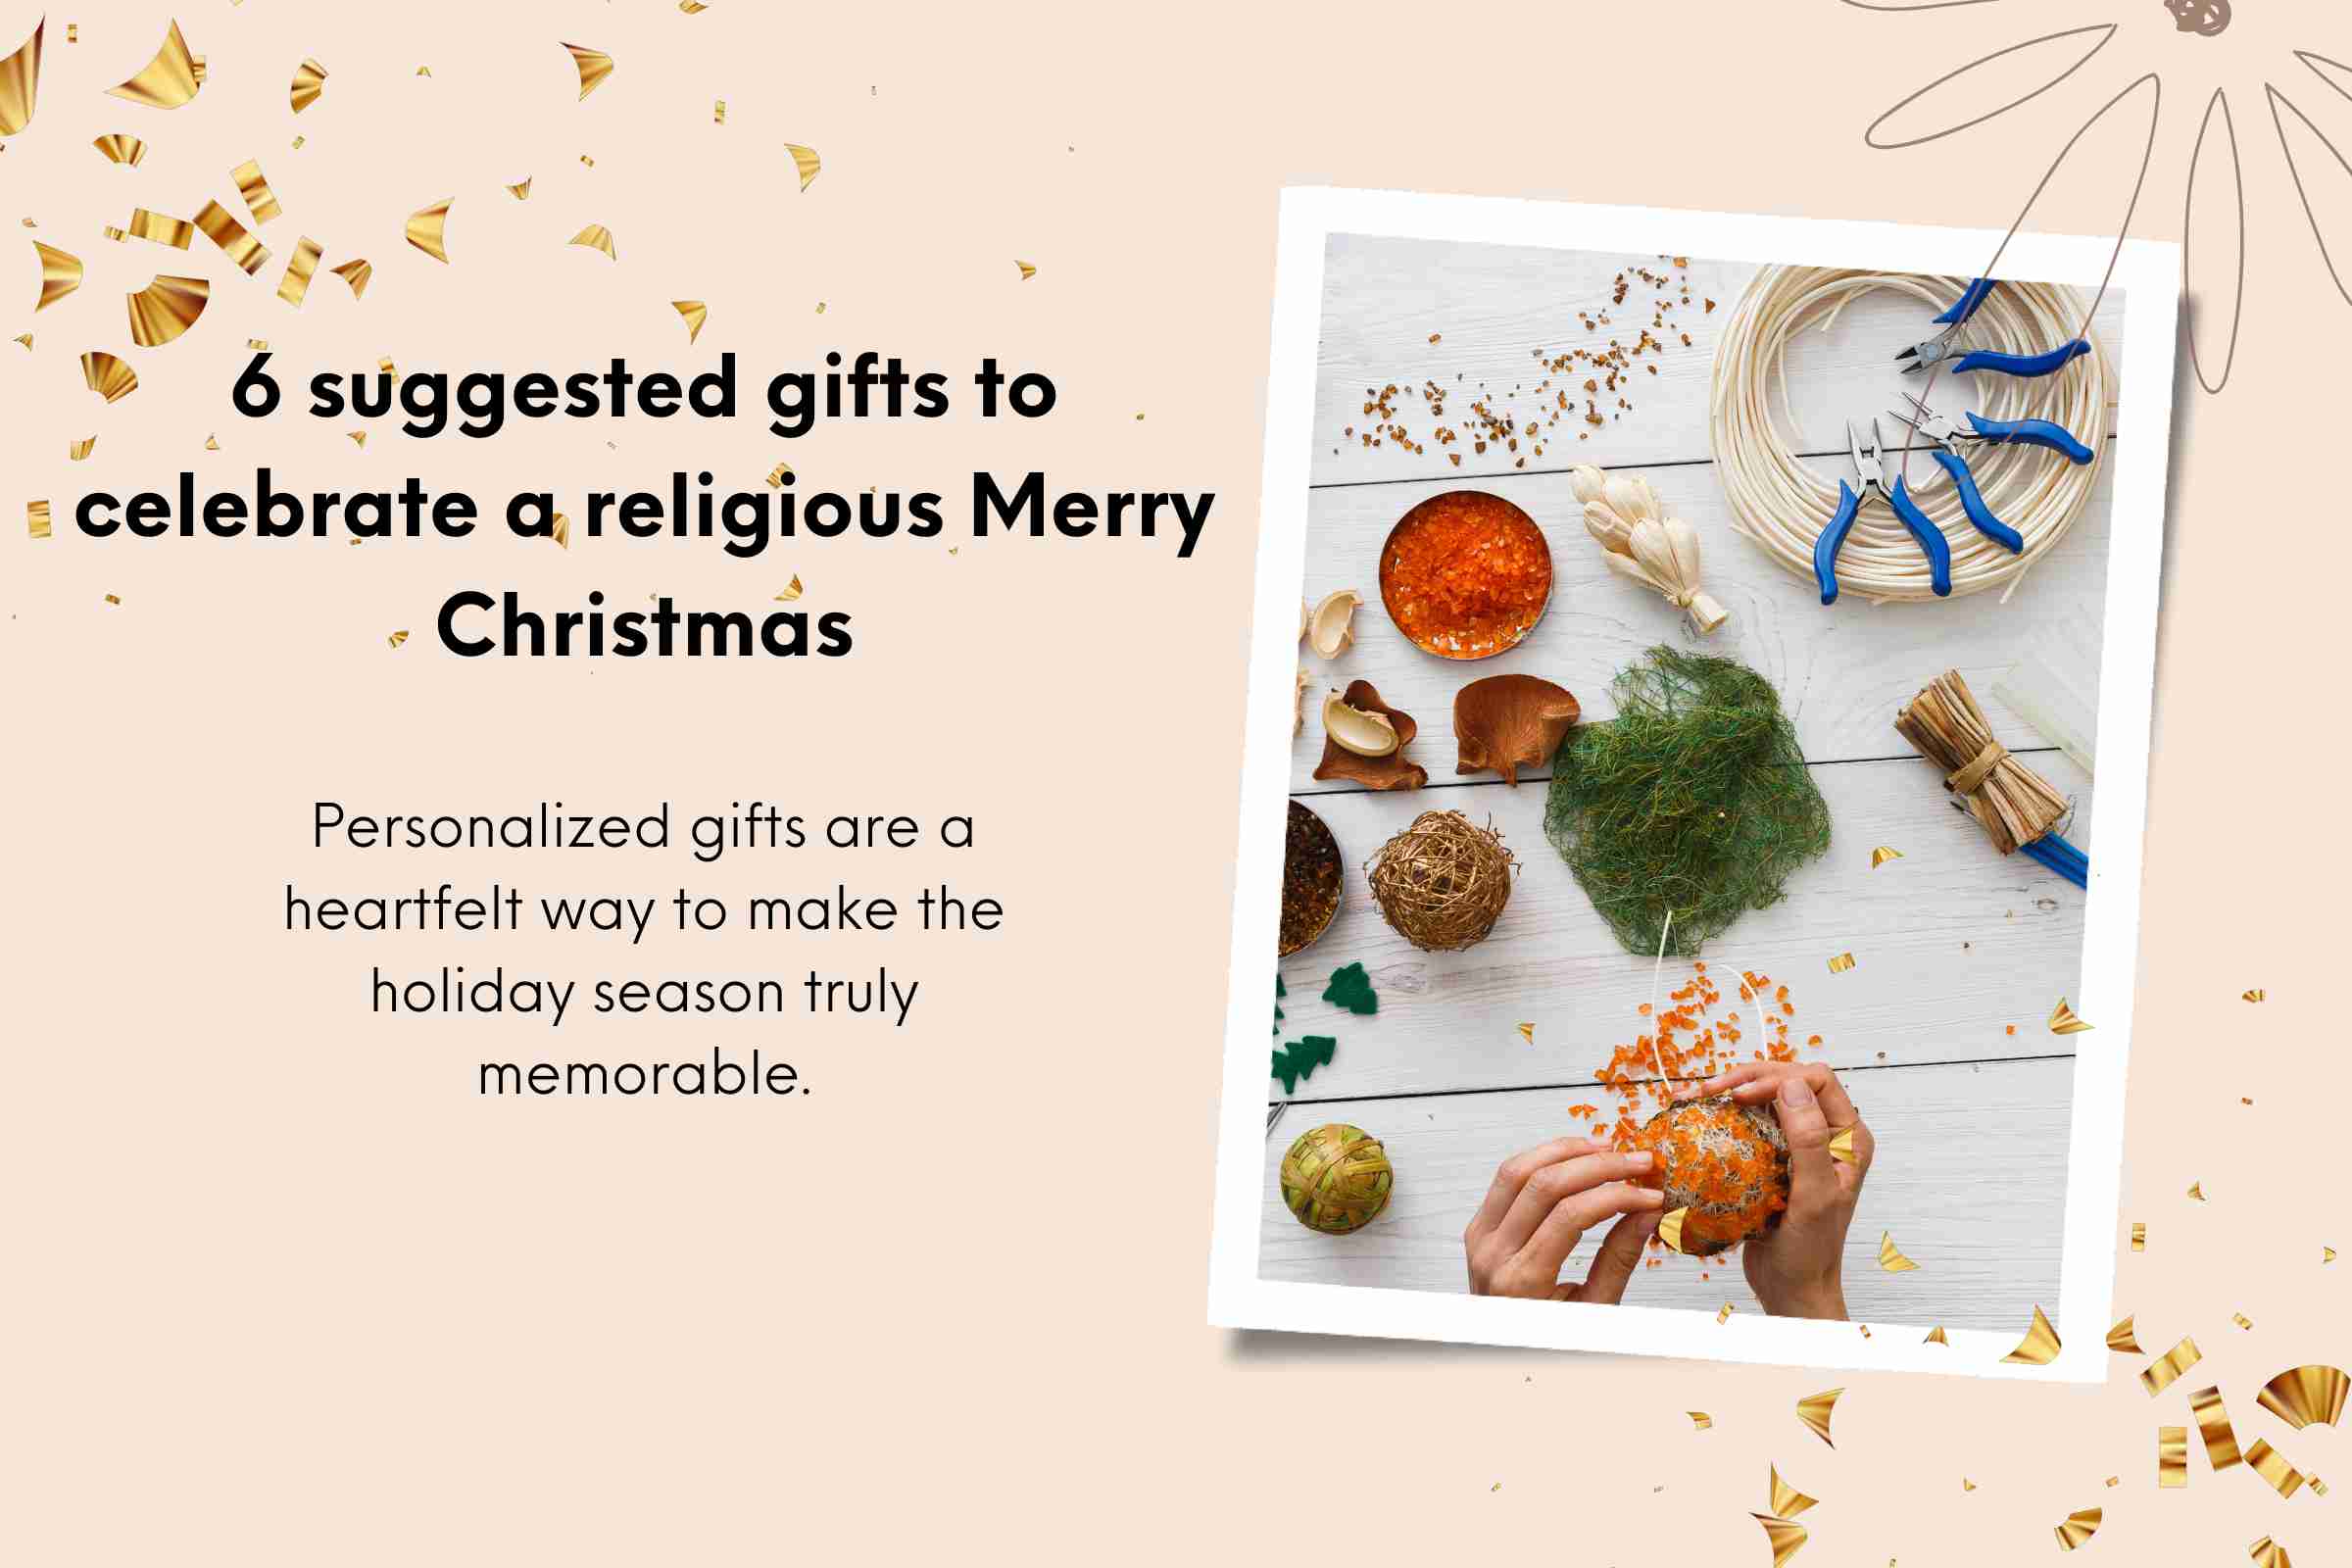 6 suggested gifts to celebrate a religious Merry Christmas